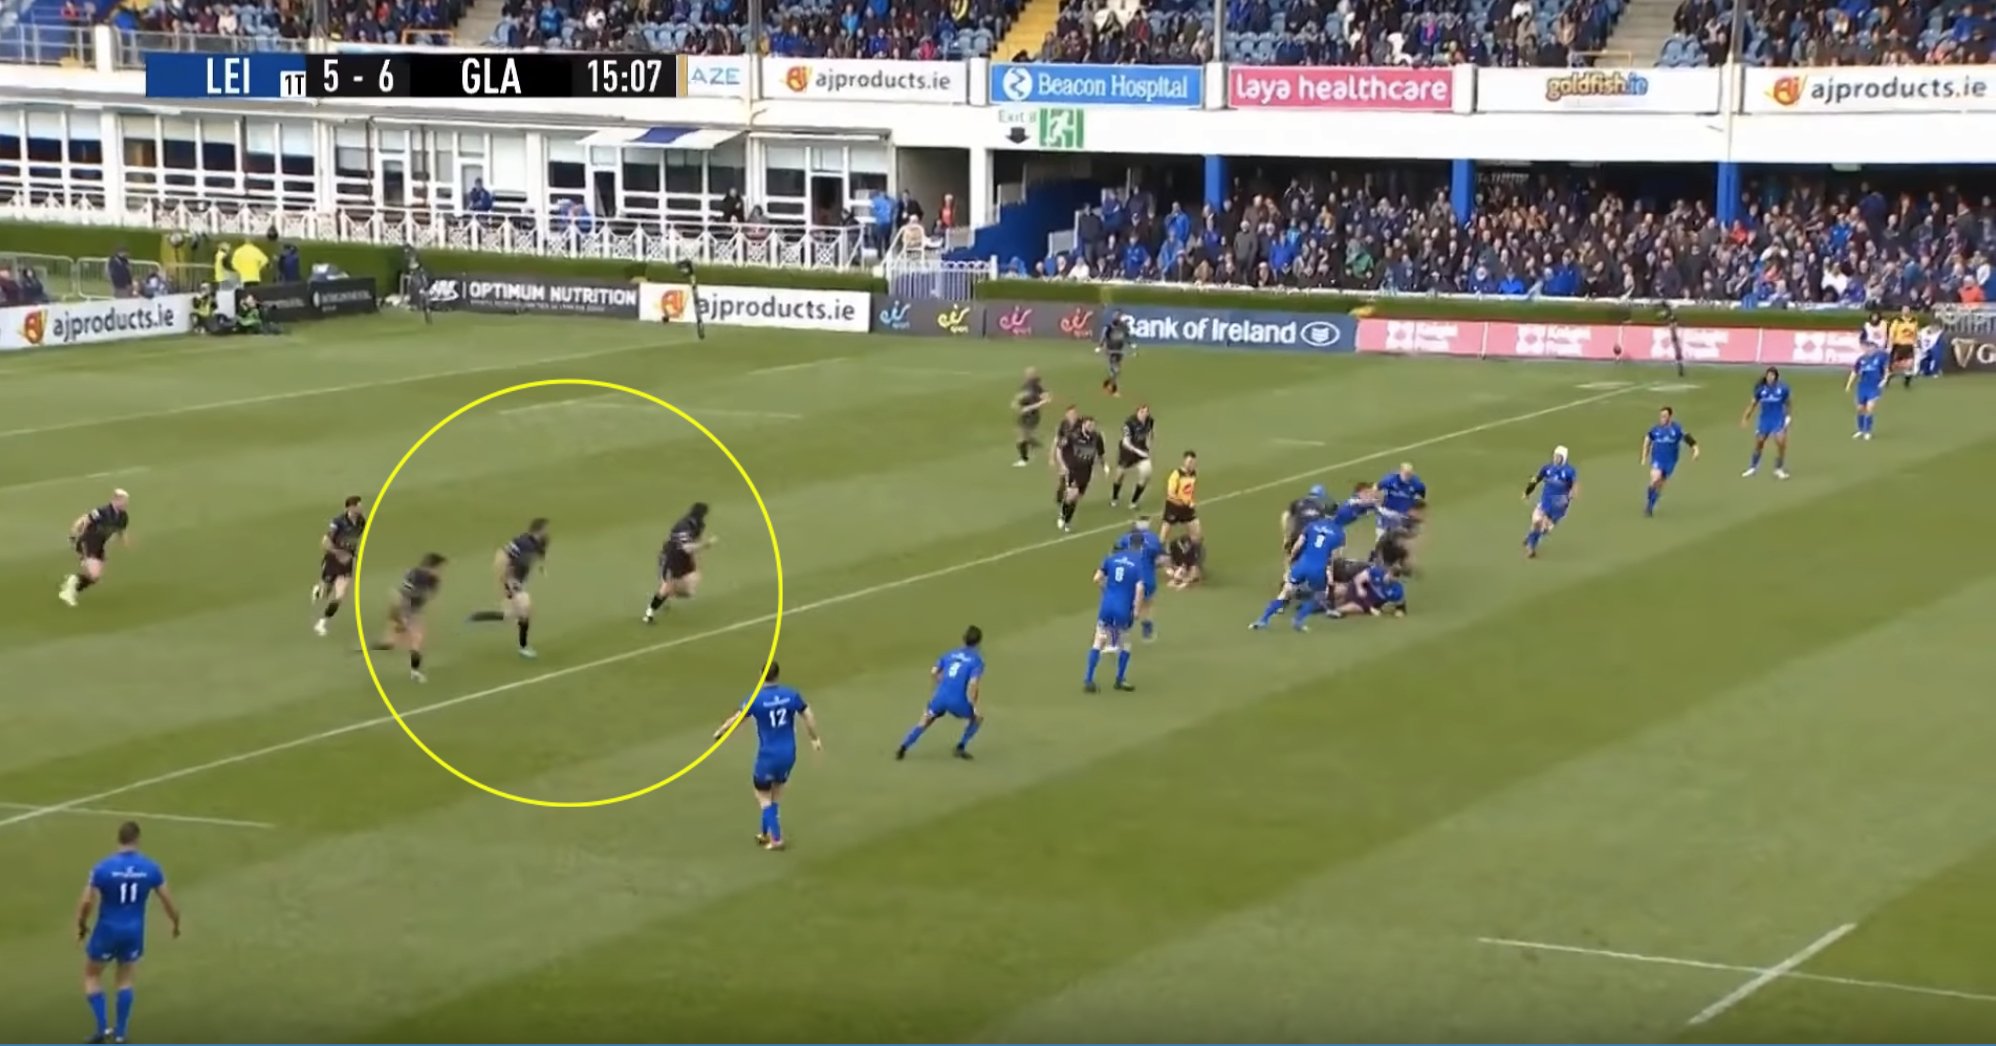 WATCH: Sam Johnson proves he has the best fend in the World with a wonder try from their own 22